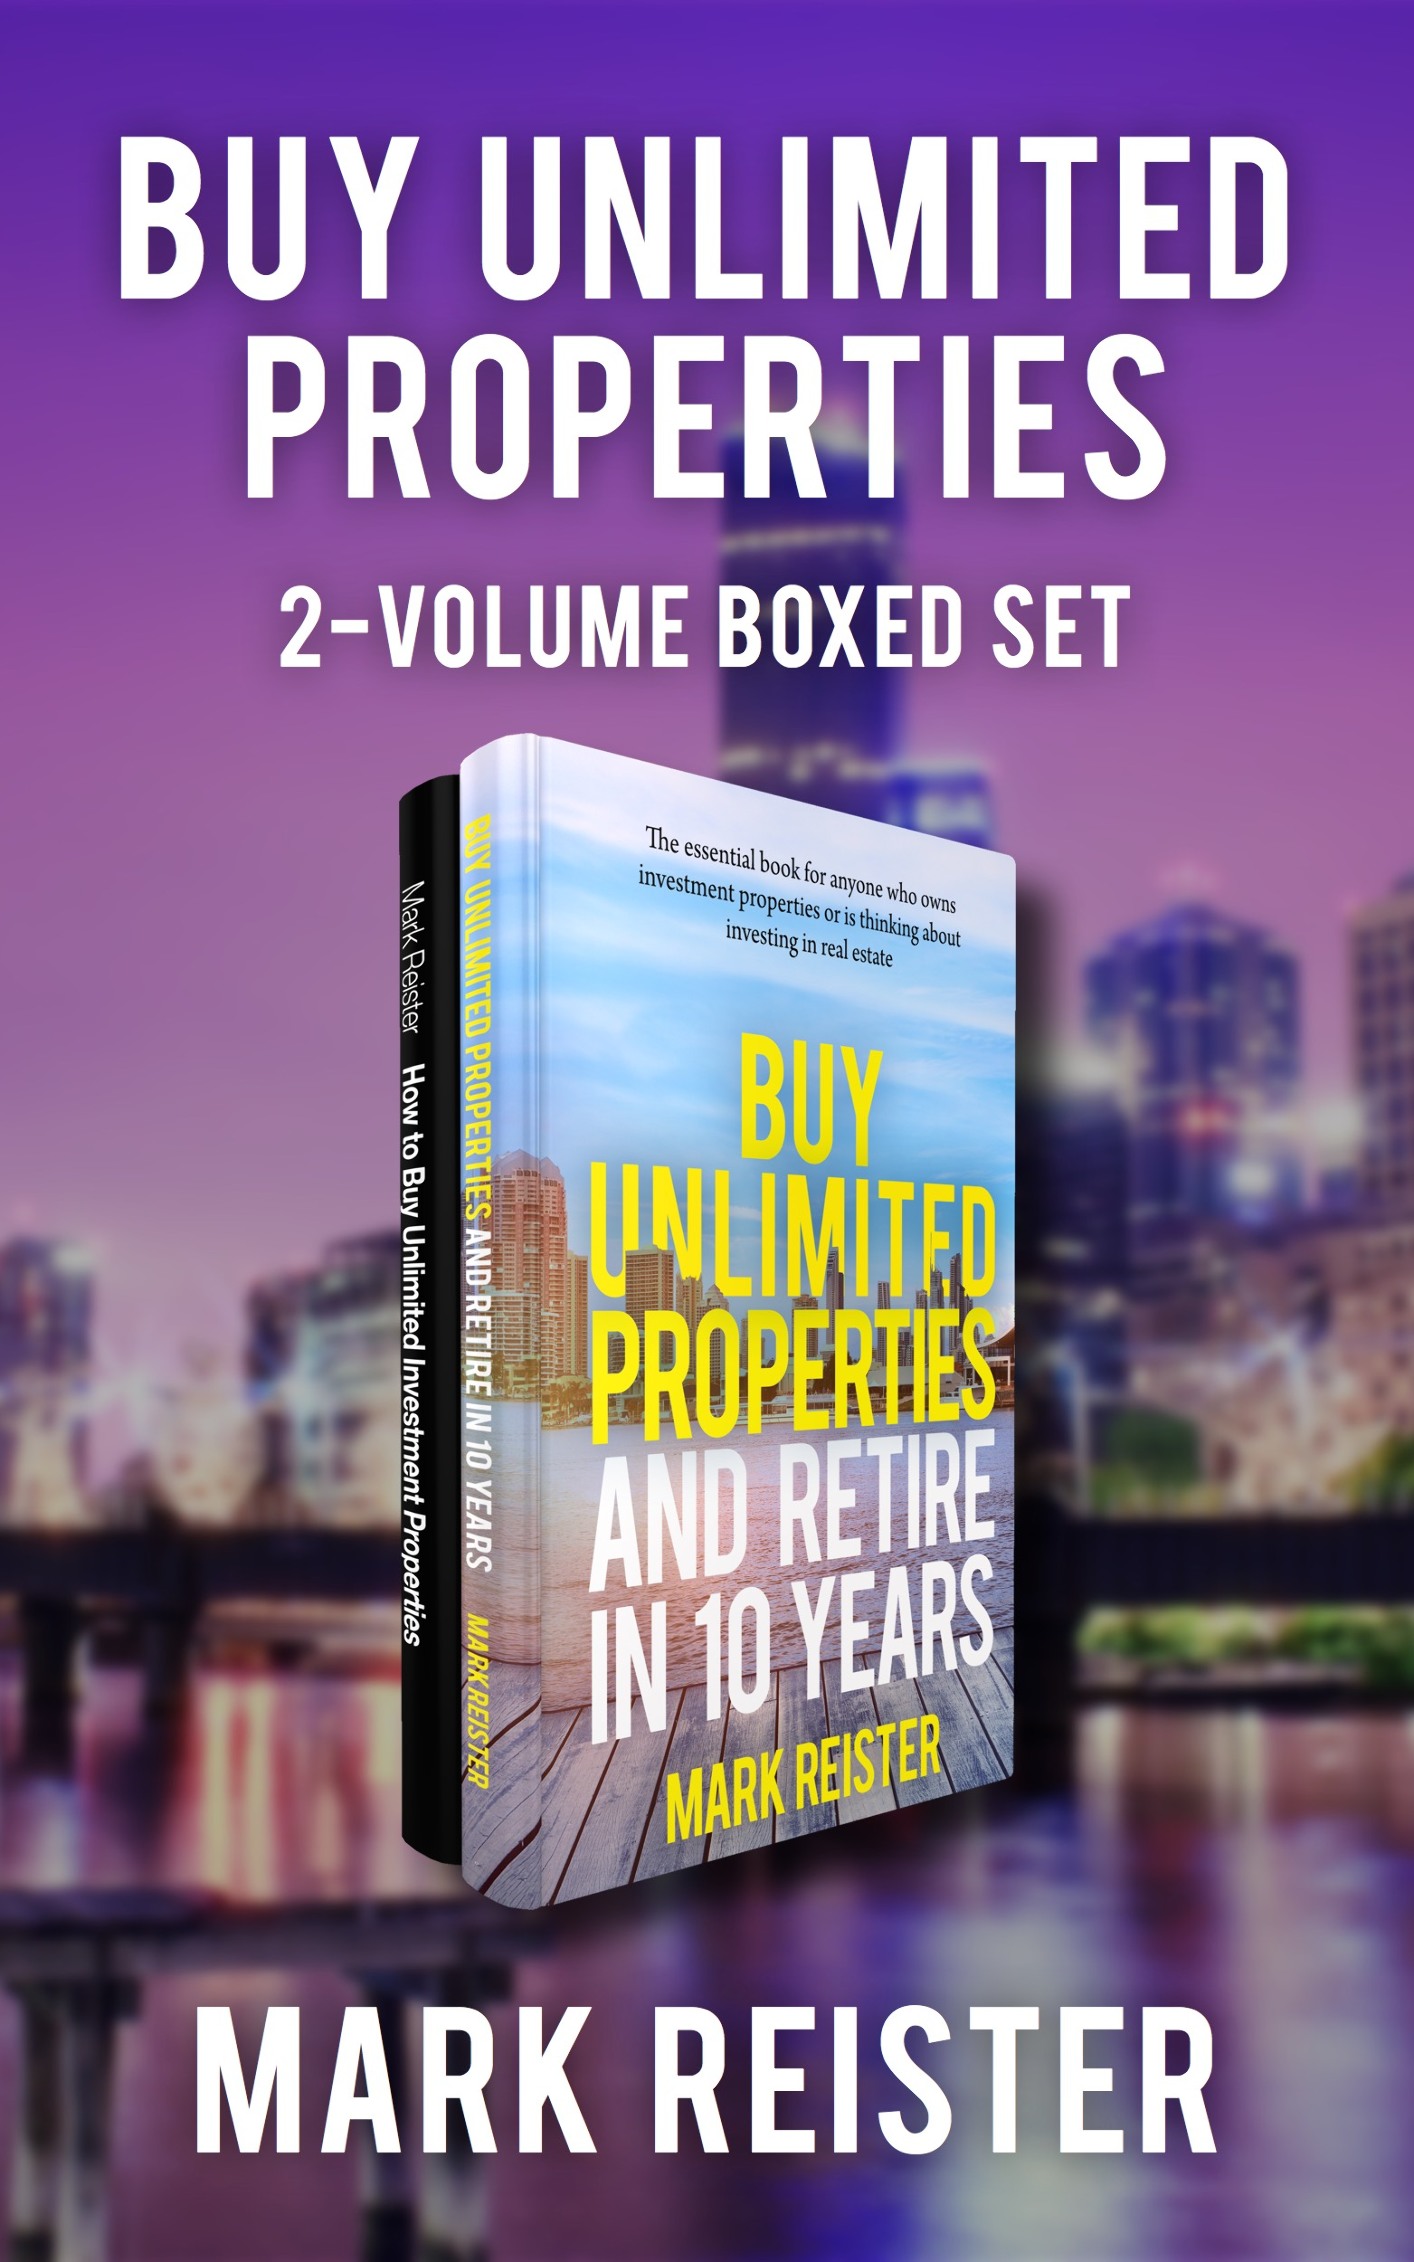 Buy Unlimited Properties 2-volume boxed set Mark Reister 2015 All rights - photo 1